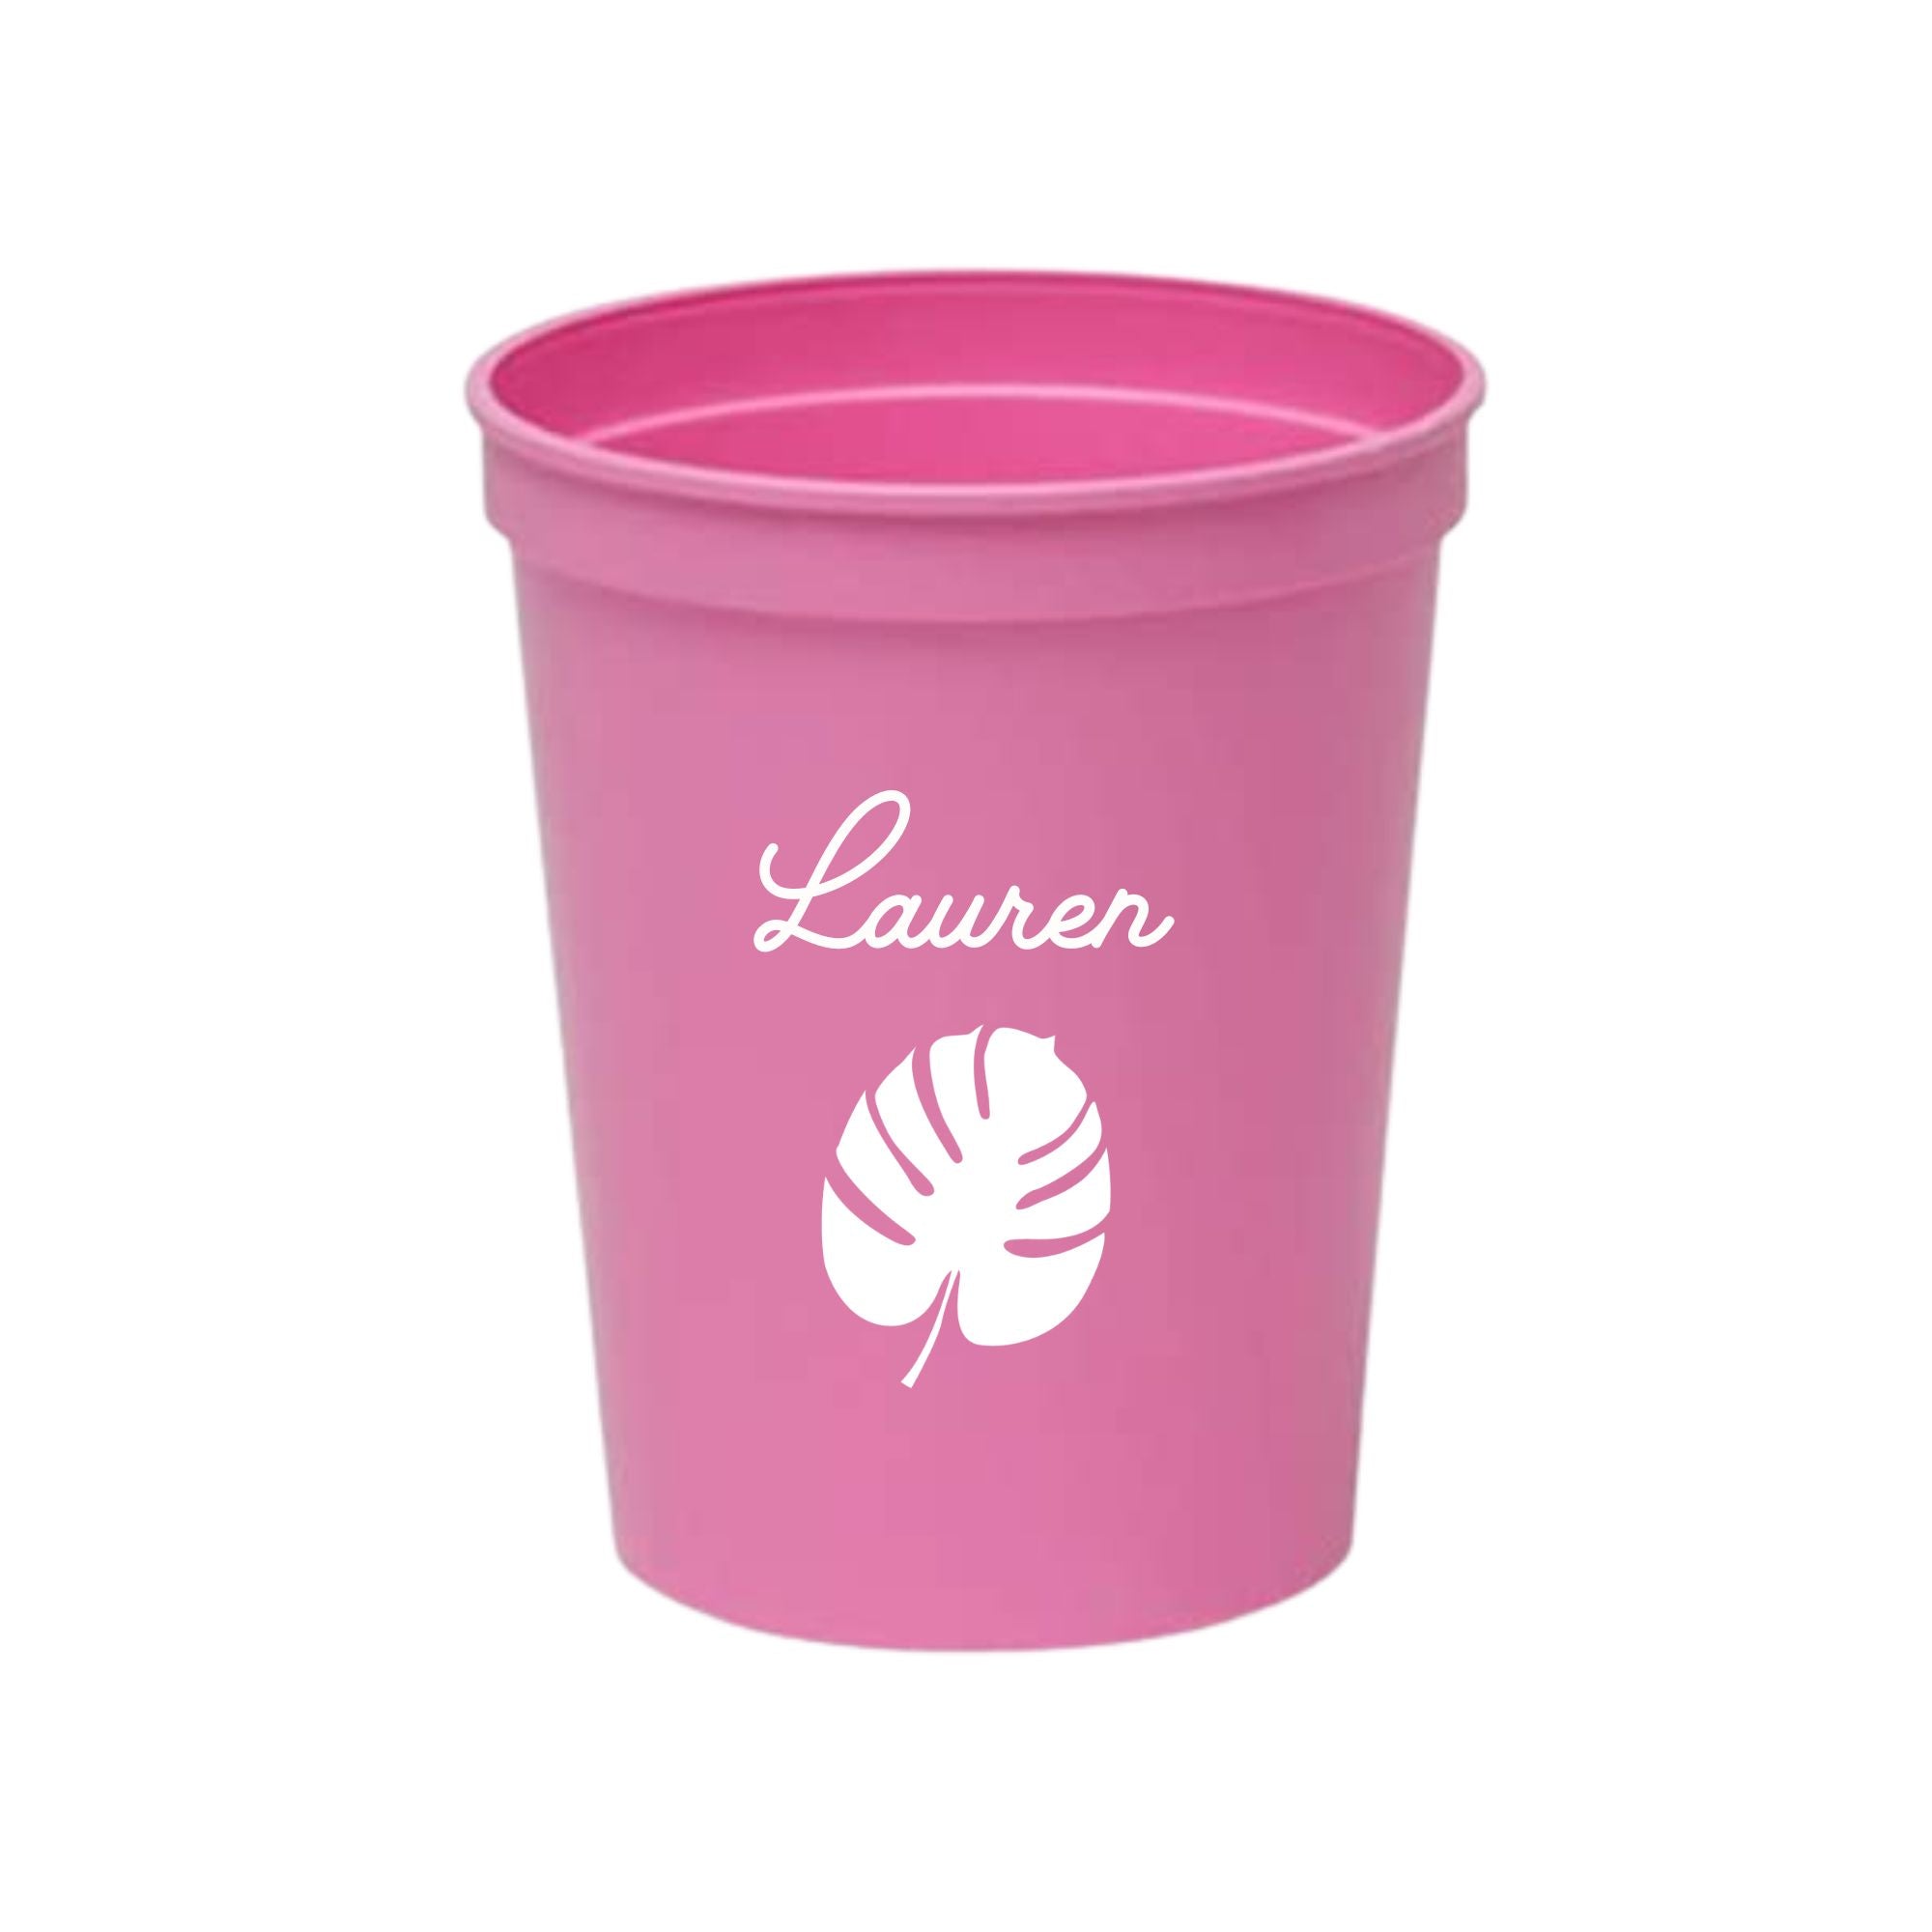 Palm Leaf Stadium Cup - Sprinkled With Pink #bachelorette #custom #gifts